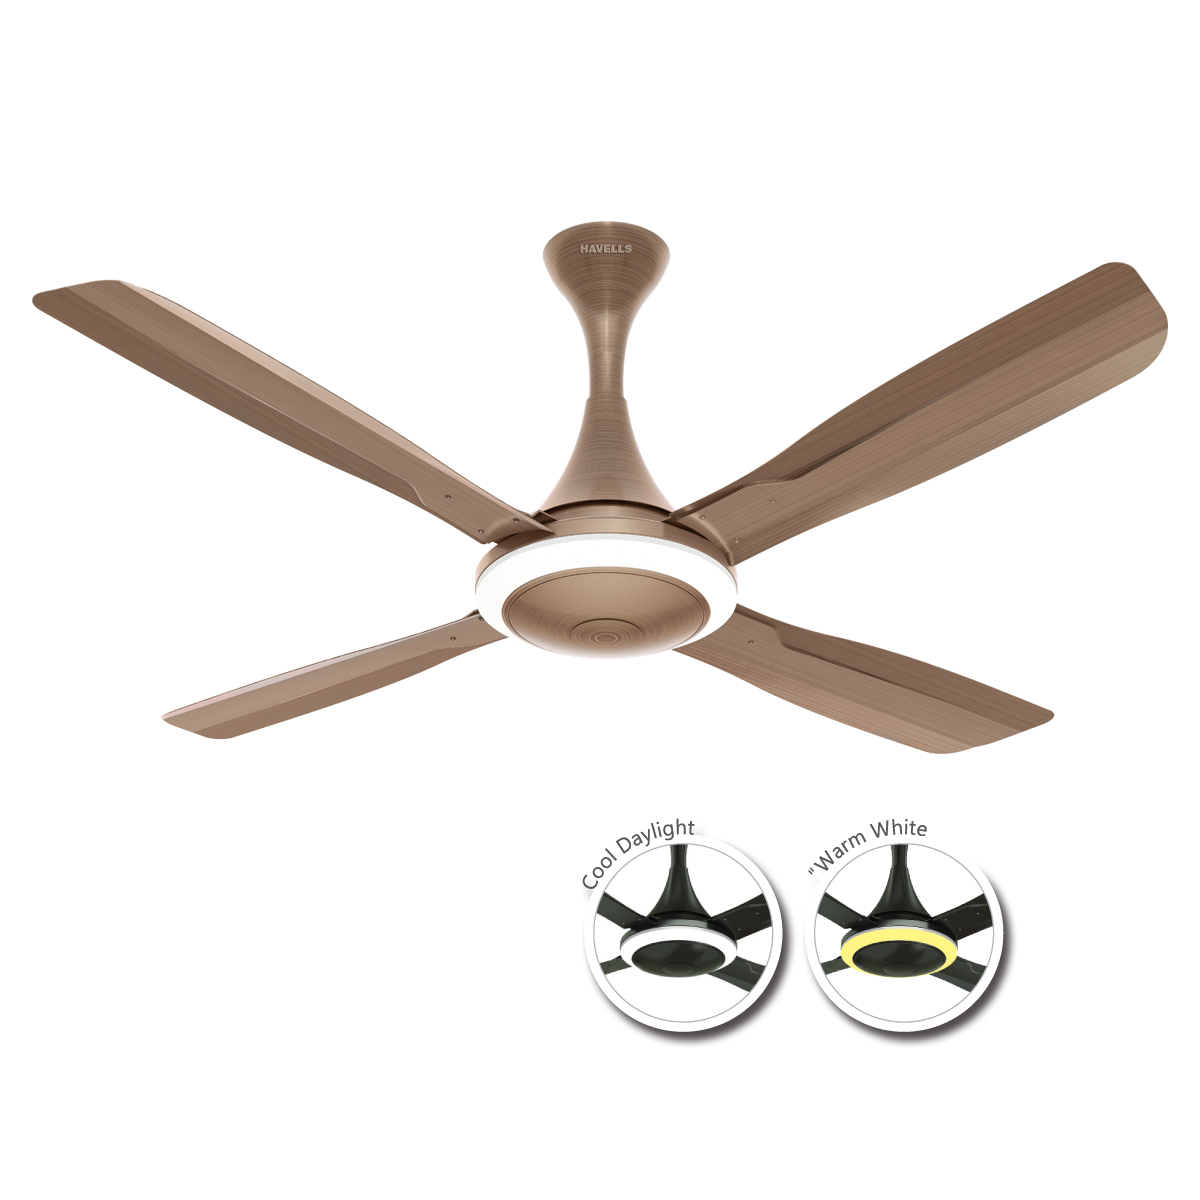 Havells 4 Blade Ceiling Fan 1320mm with Under Light URBANE UL